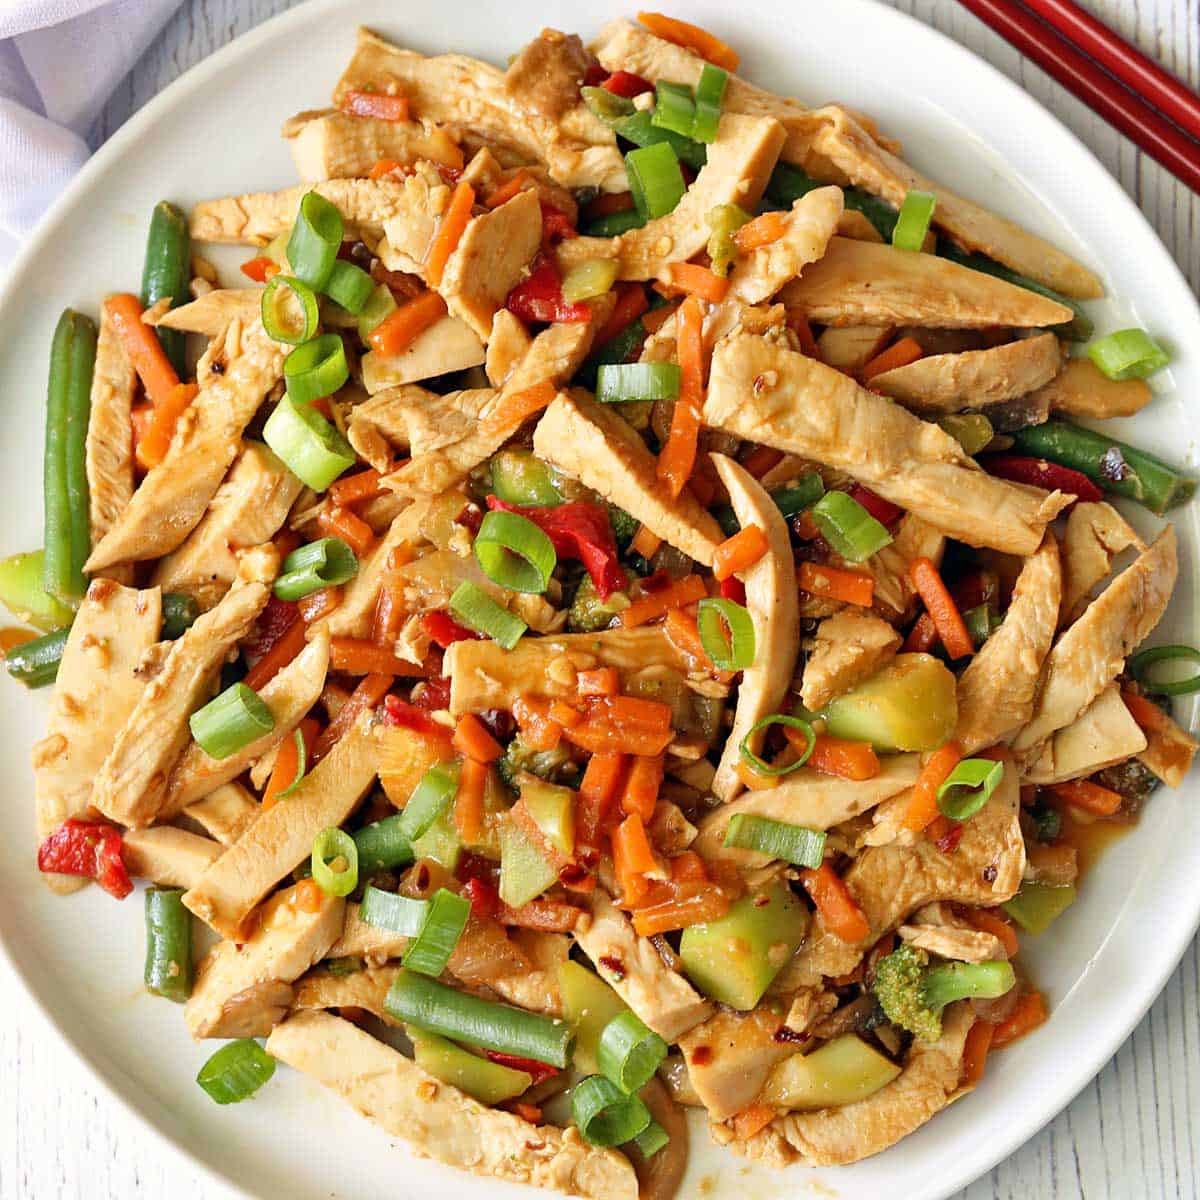 Meal of the month: Stir-fry supper - Harvard Health